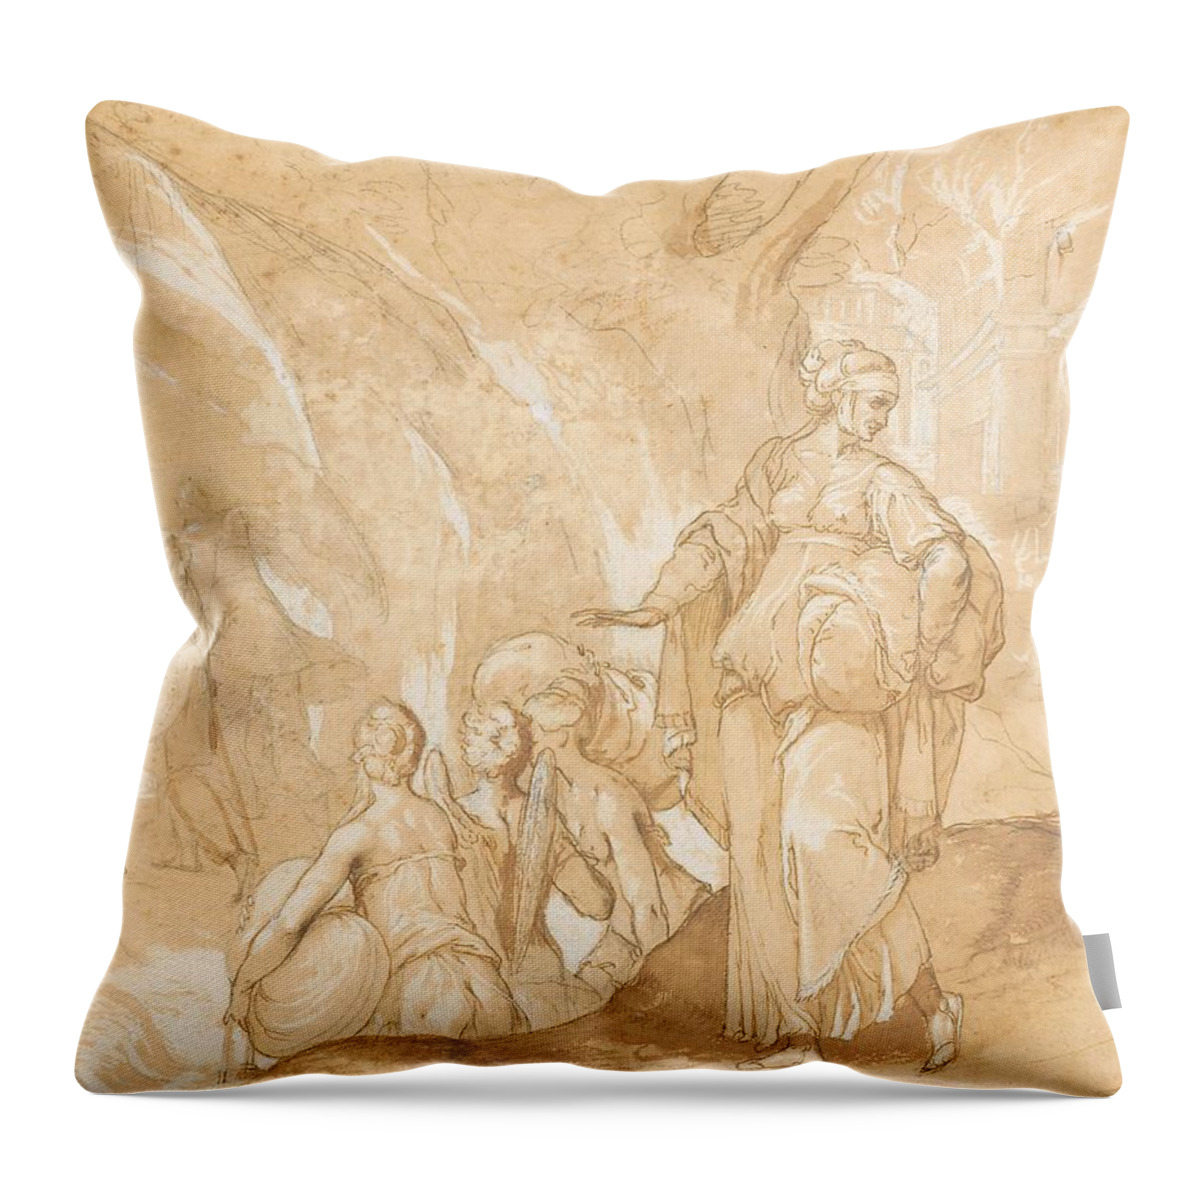 Lot Throw Pillow featuring the drawing Lot's wife looking back at the destruction of Sodom and Gomorrah by Toussaint Dubreuil